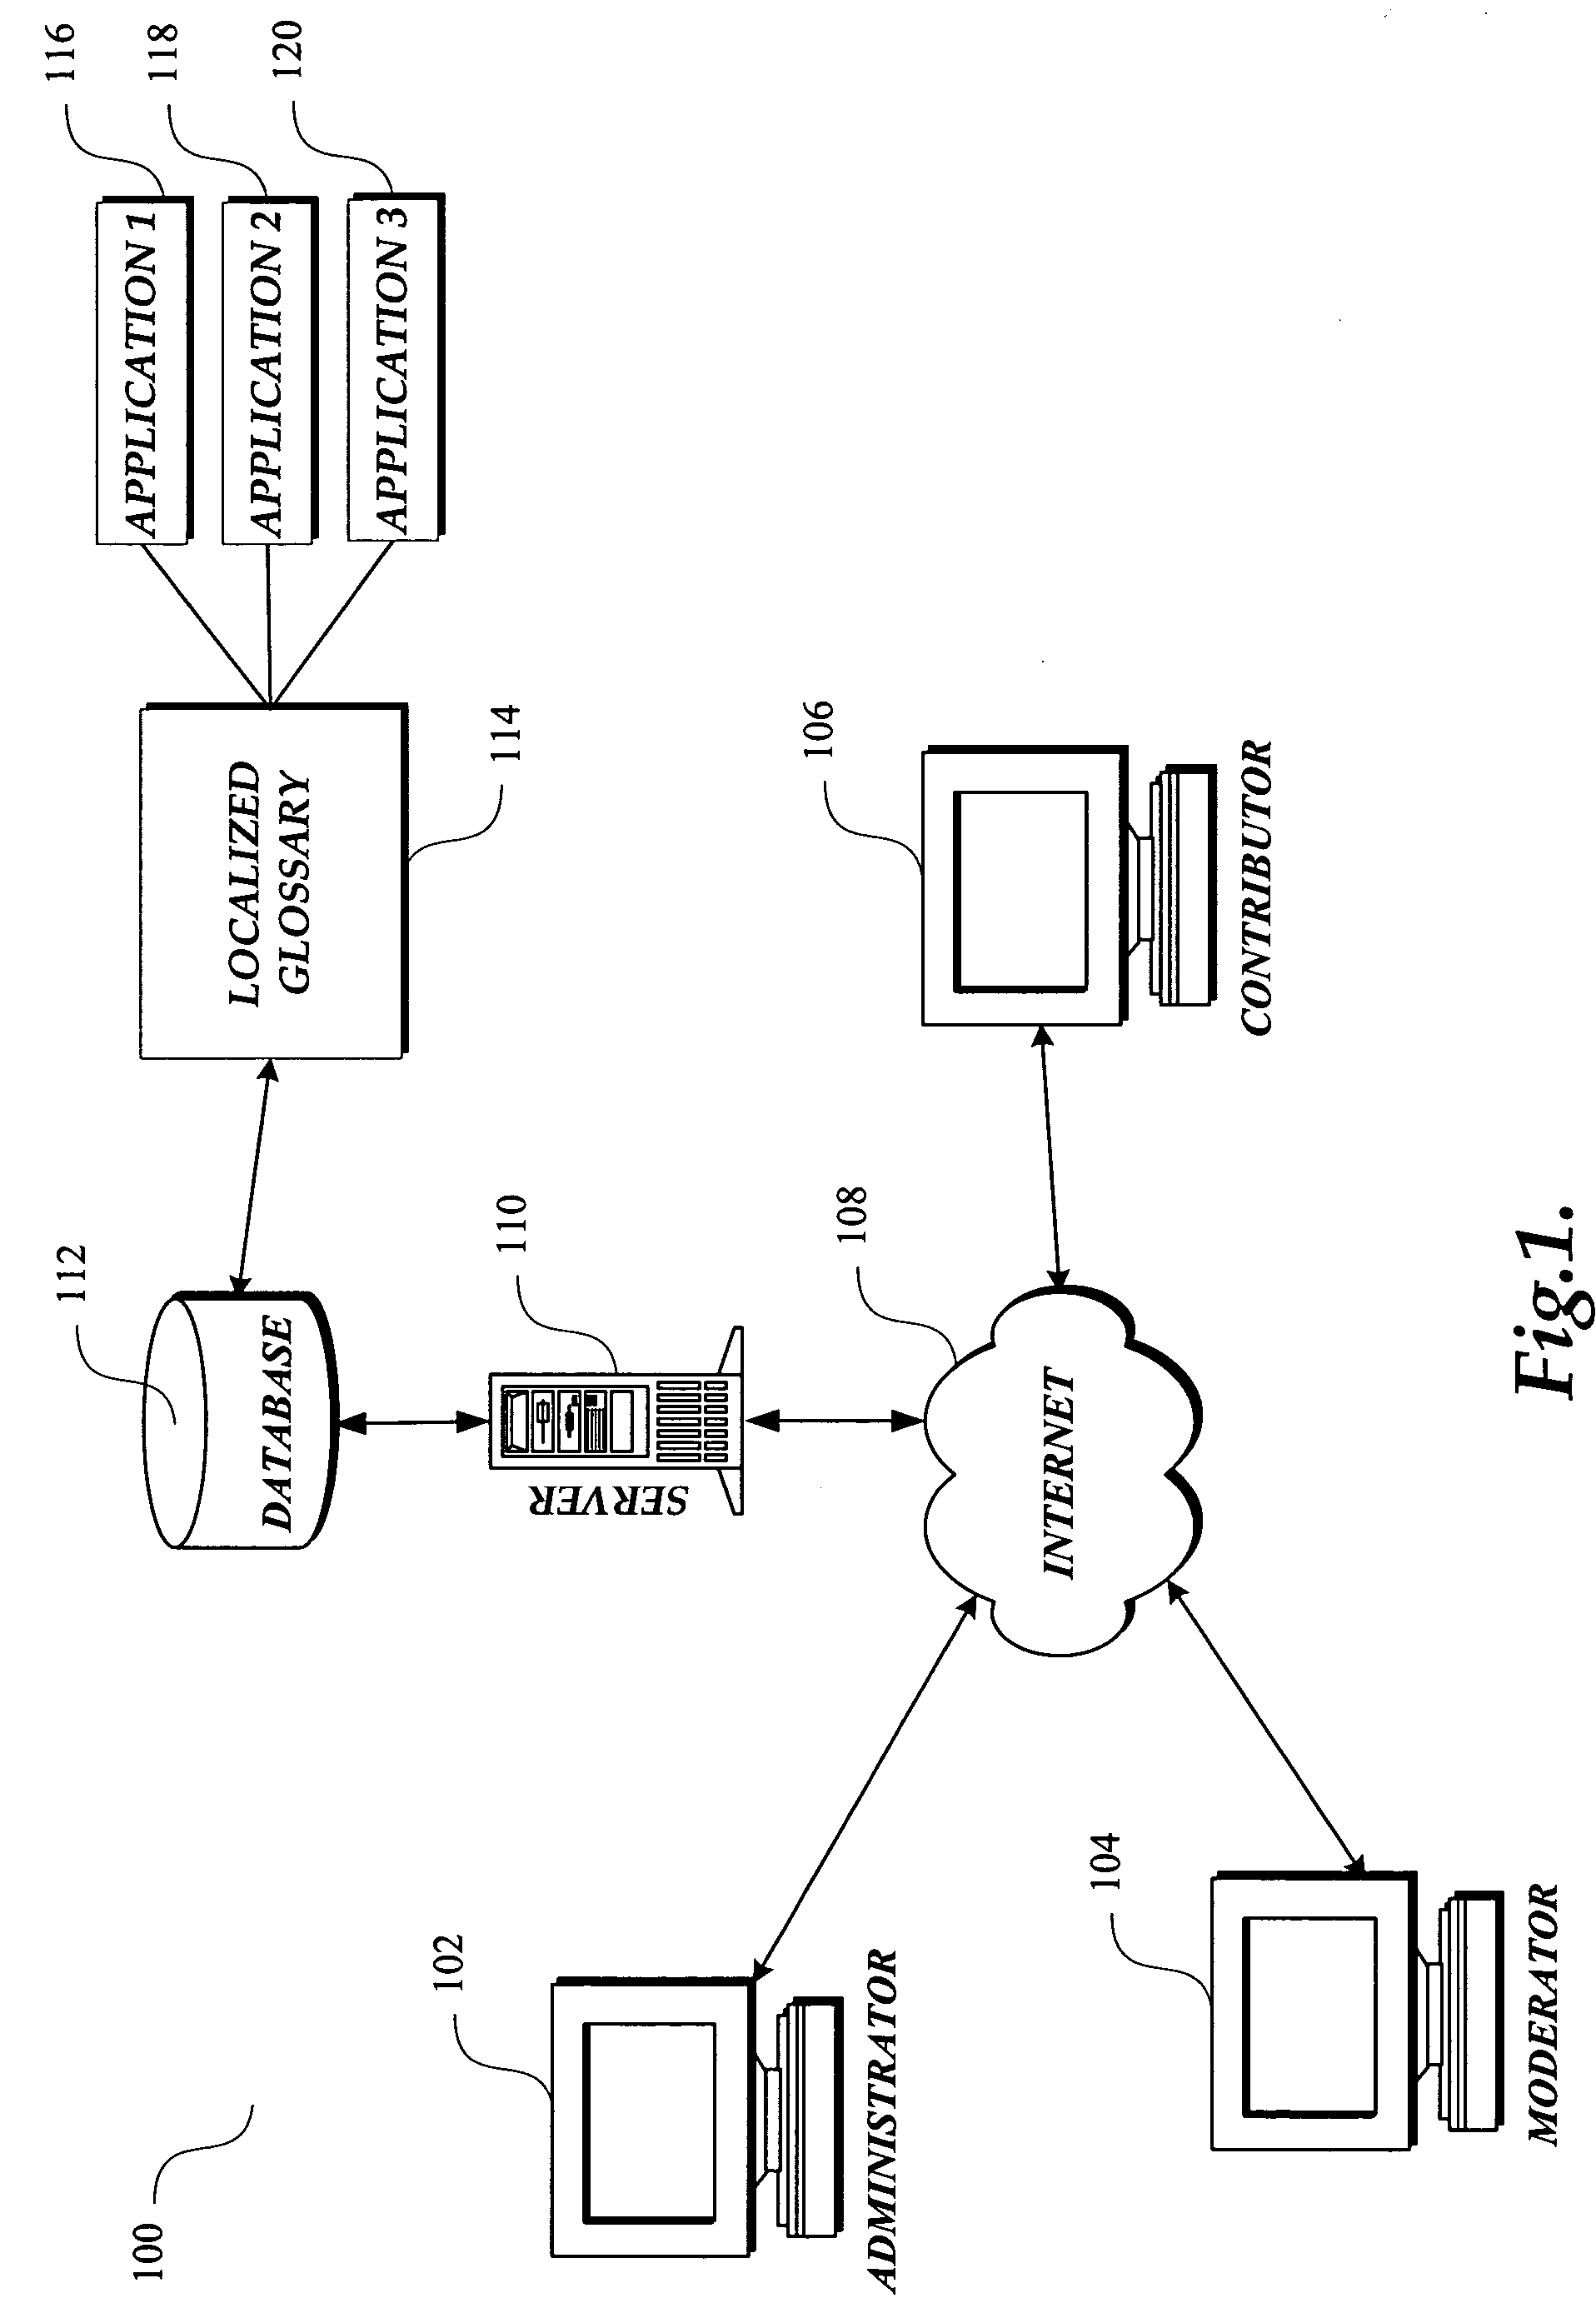 System and method for translating from a source language to at least one target language utilizing a community of contributors